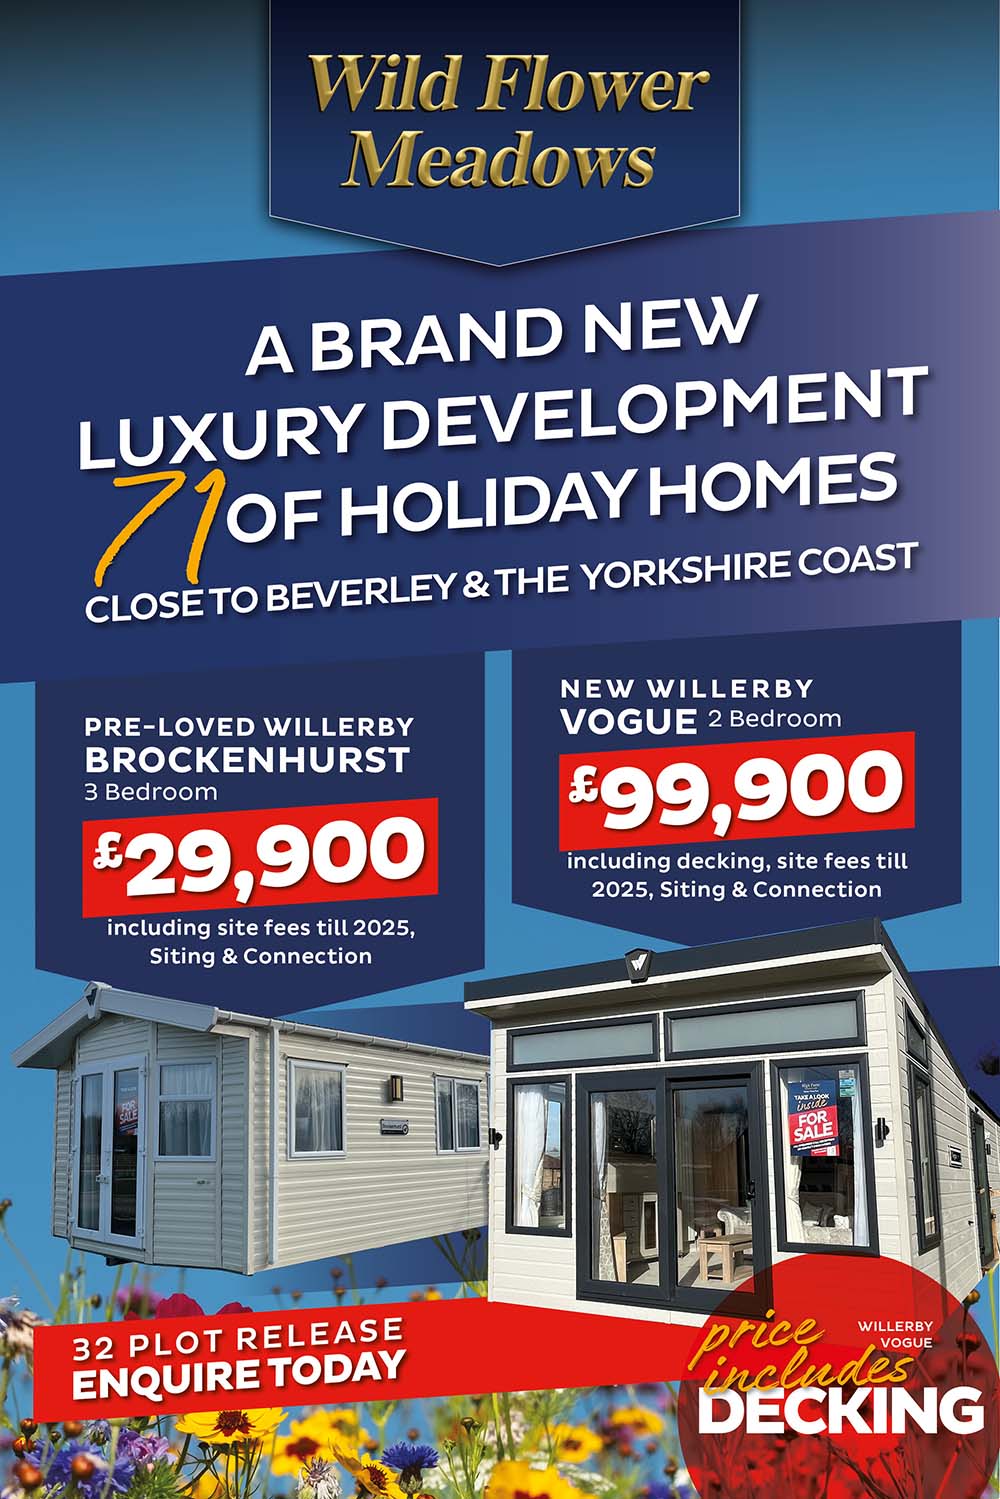 A brand new luxury development of 71 holiday homes close to Beverley and the Yorkshire coast.